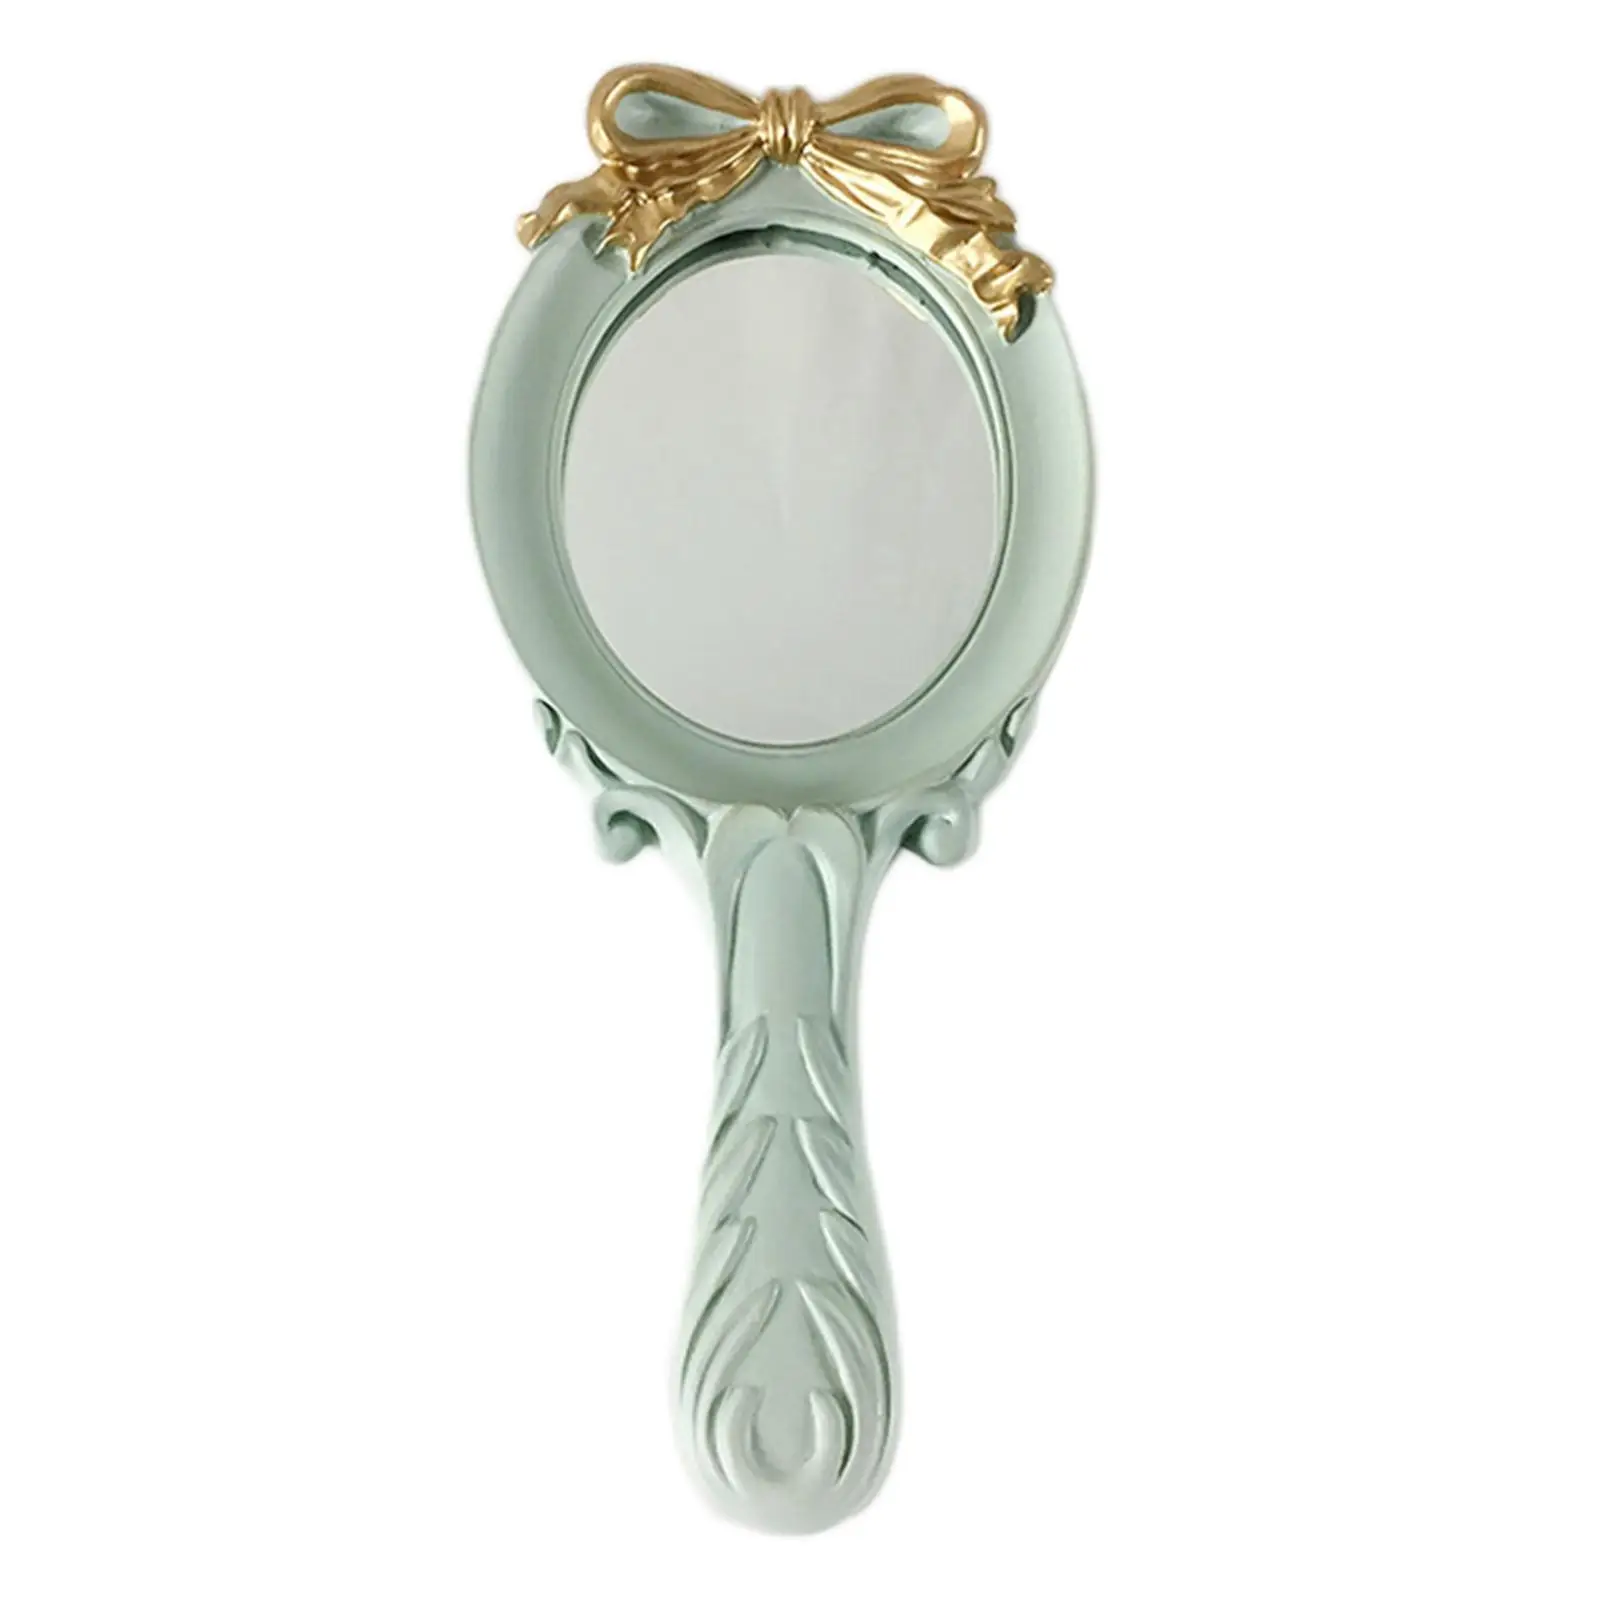 European Style Princess Makeup Mirror with Roses Women Girls Oval Cosmetic Tool with Anti Slip Handle Heart